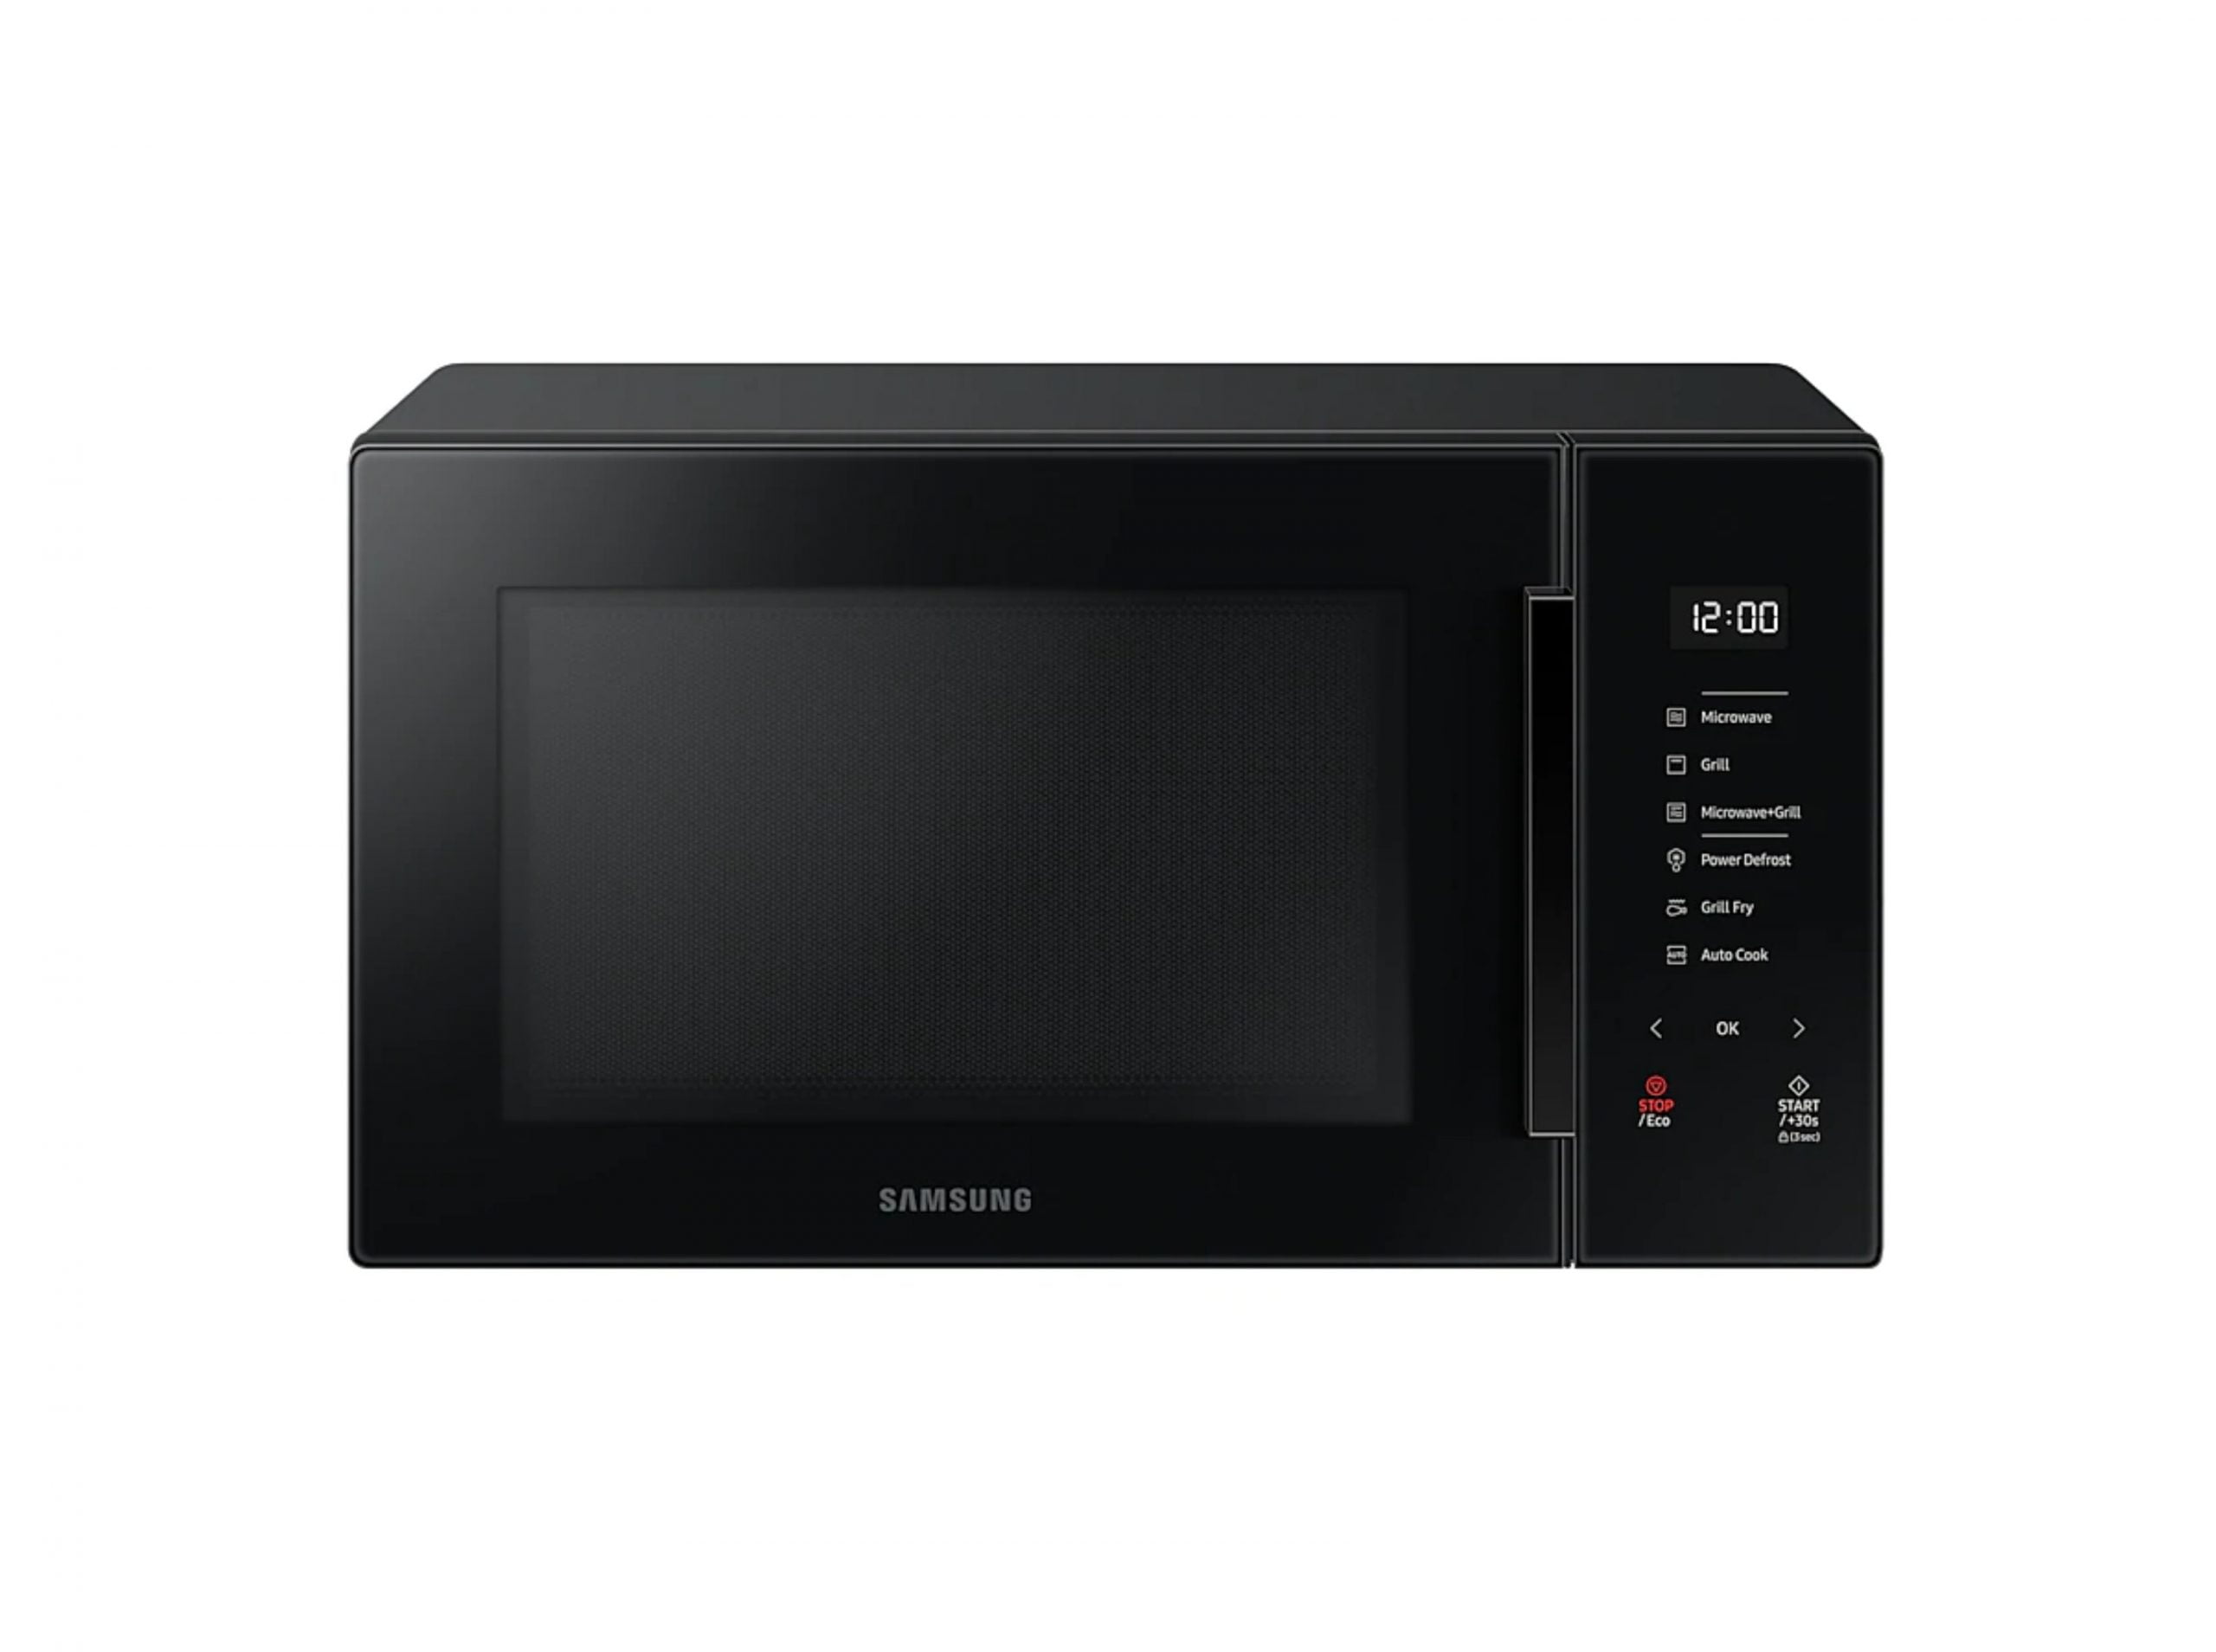 Samsung 30L Grill Microwave Oven with Healthy Grill Fry Function